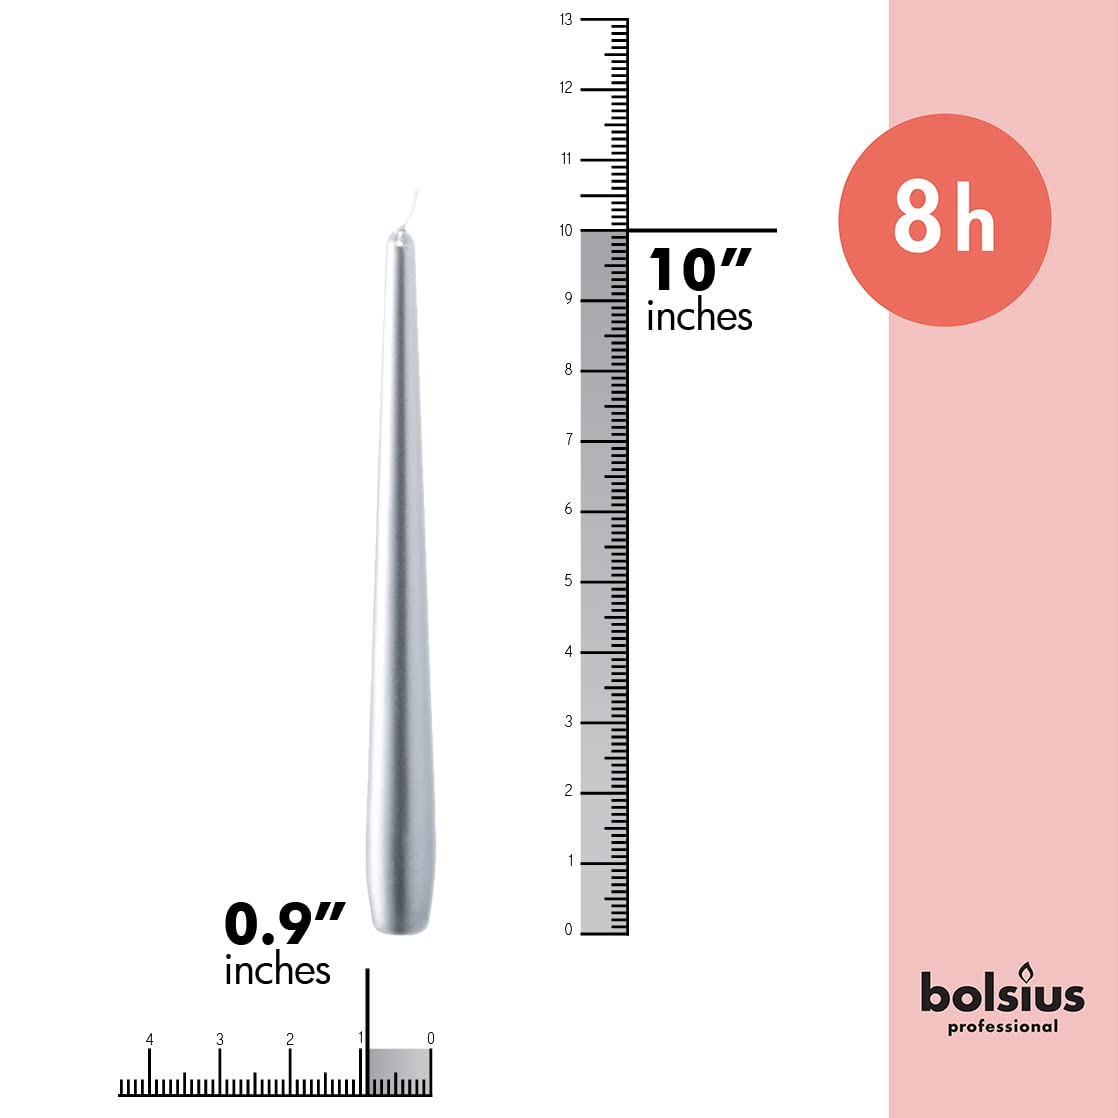 BOLSIUS Taper Candles - 8 Burn Hours - Premium European Quality - Unscented Smokeless & Dripless Household Party Candlesticks  - Like New